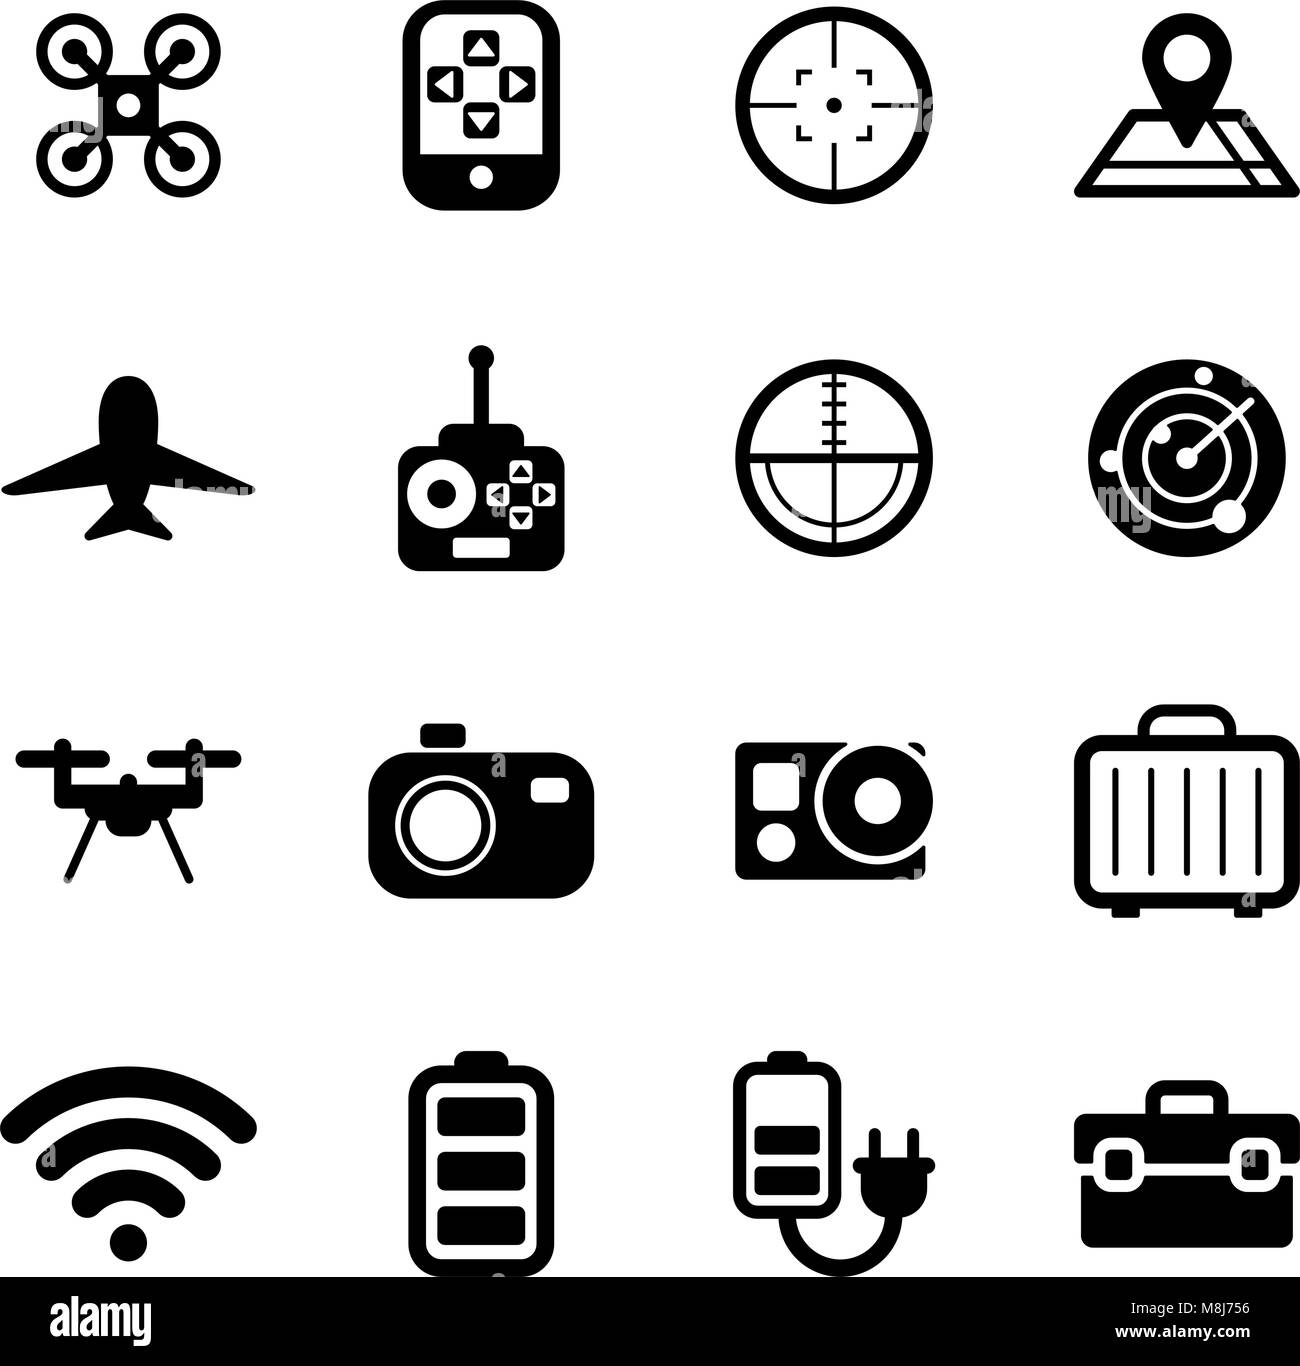 Drone Or Quadcopter Icons Stock Vector